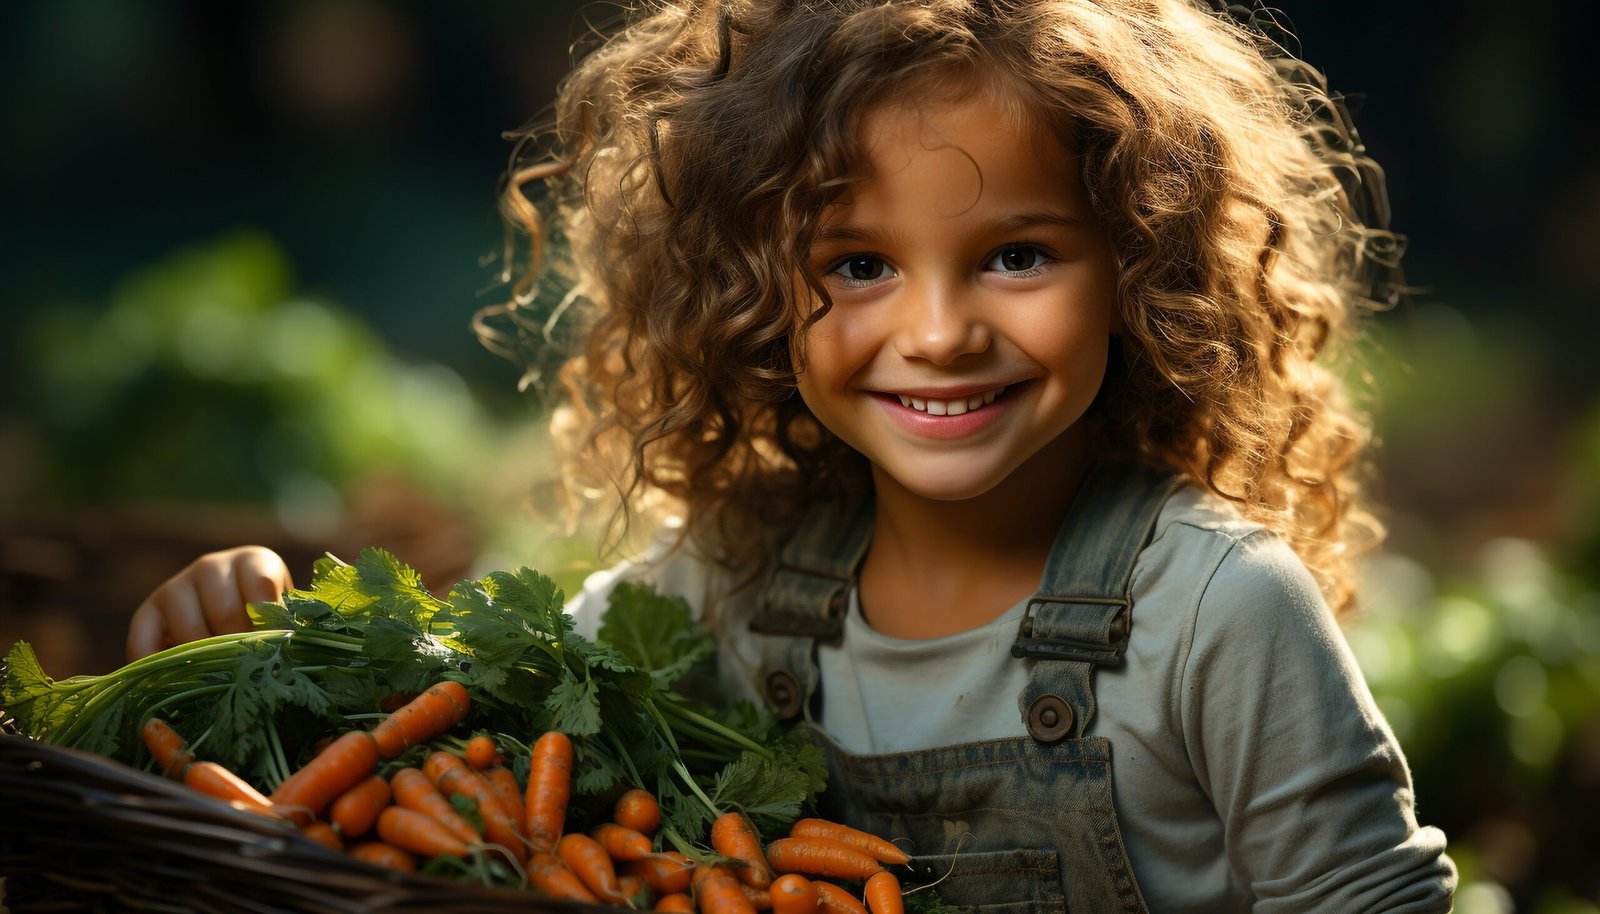 I’m Raising My Kids on a Plant-Based Diet for Their Future